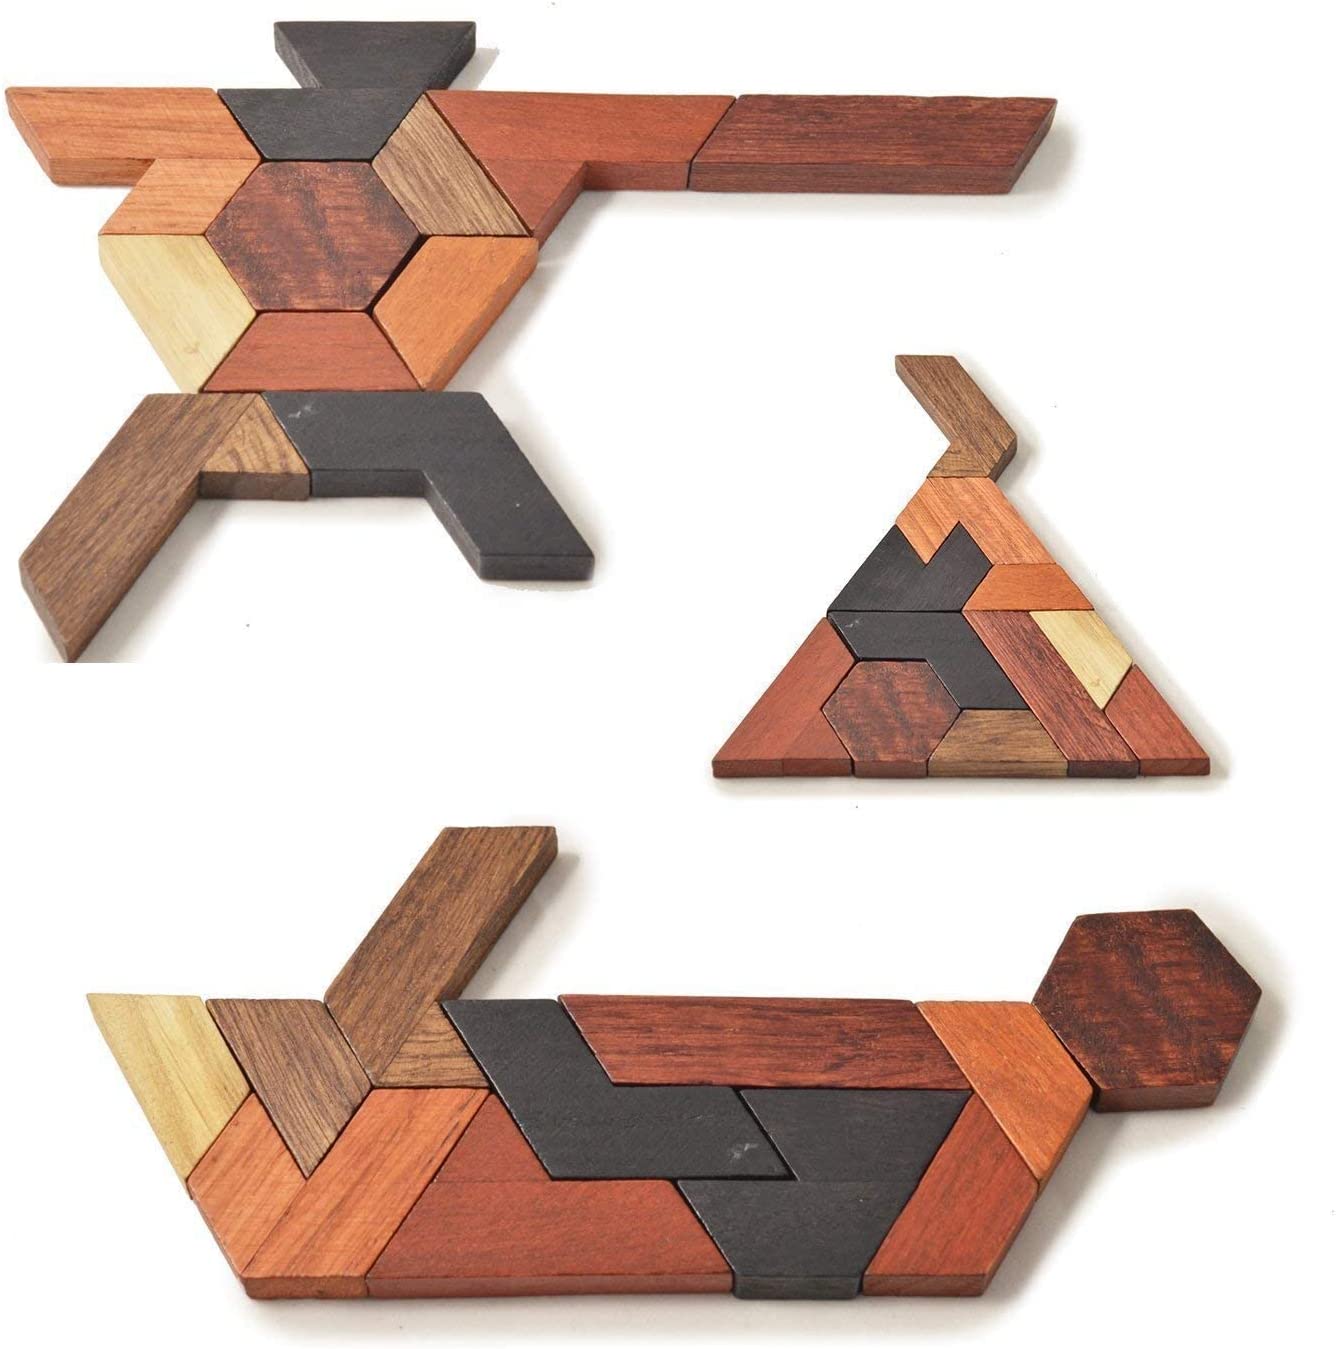 Hexagon Tangram Wooden Puzzle for Kids and Adults 11pcs